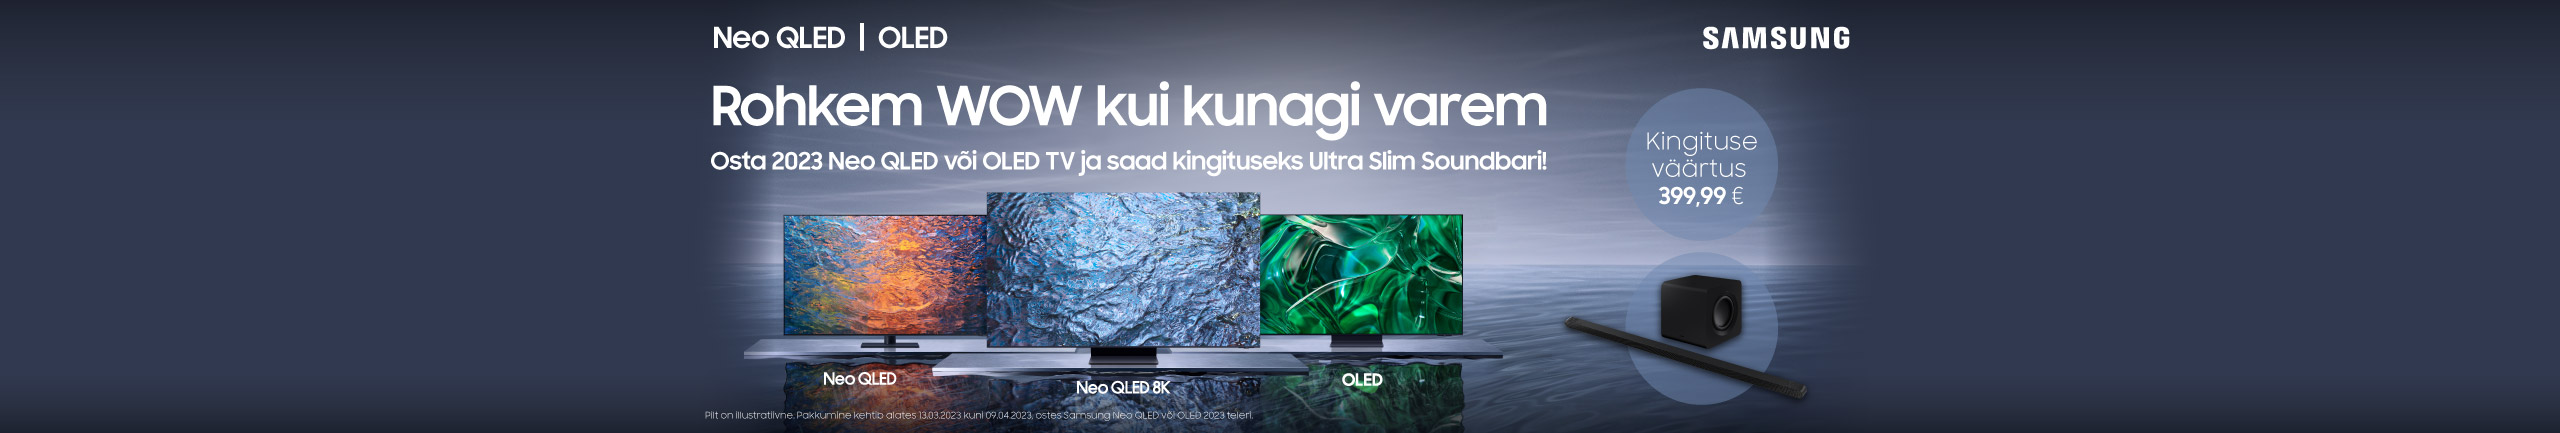 Buy 2023 Samsung Neo QLED or OLED TV and get a soundbar as a complimentary gift!